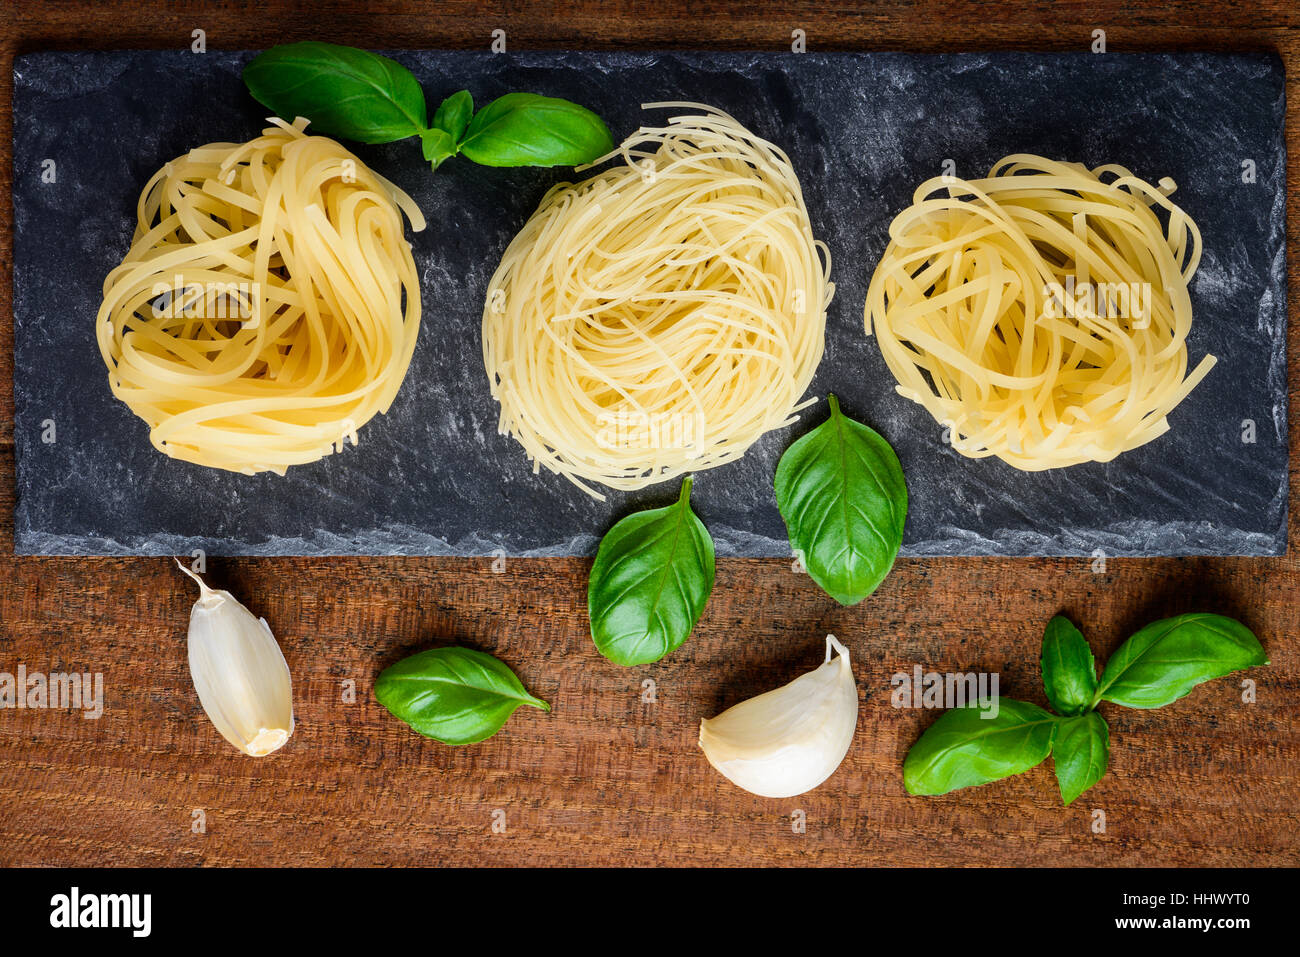 Yellow Tagliolini with basil and garlic cooking ingredients. Italian or mediterranean cuisine food Stock Photo